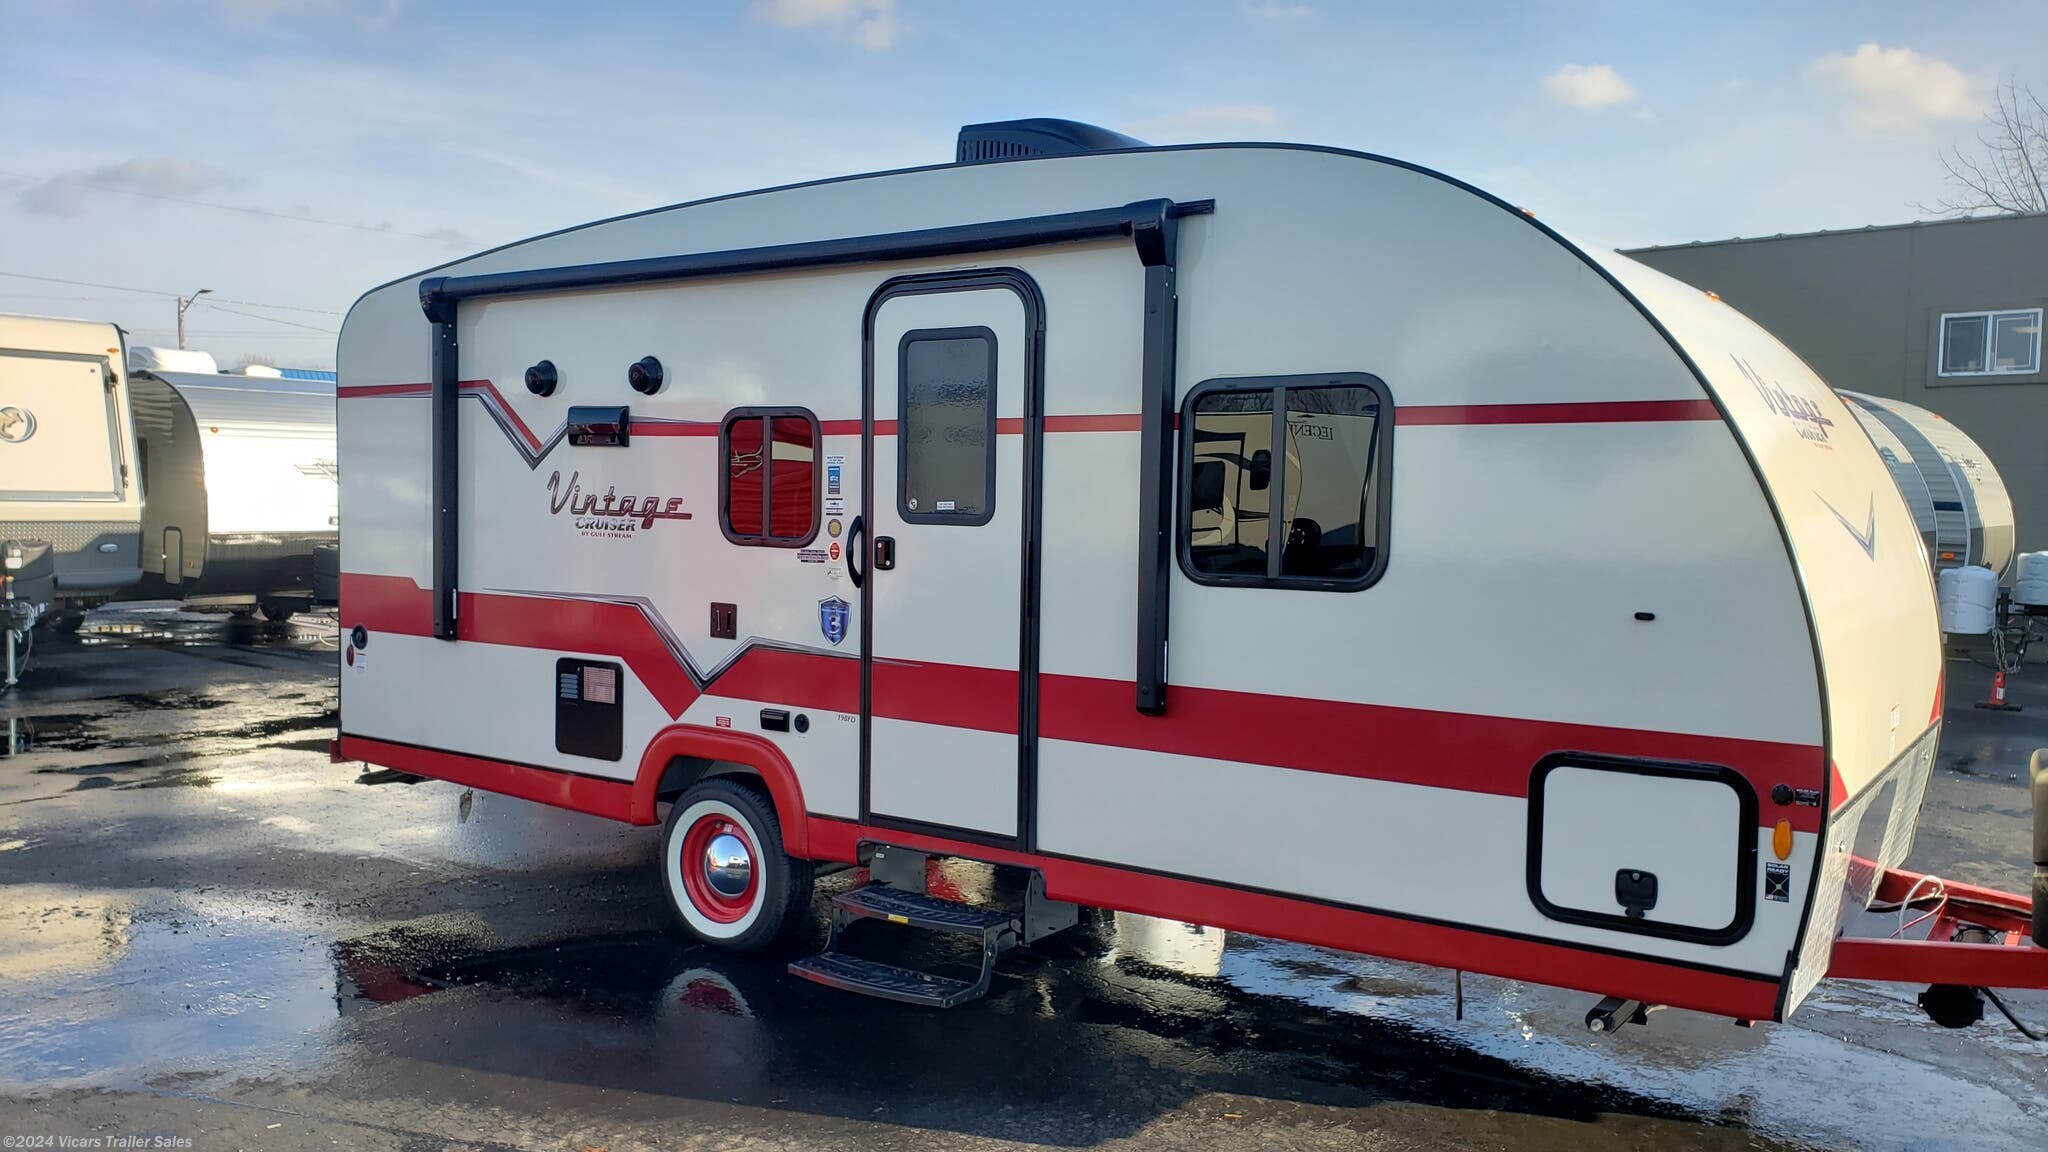 2020 Gulf Stream Vintage Cruiser 19BFD RED RV for Sale in ...